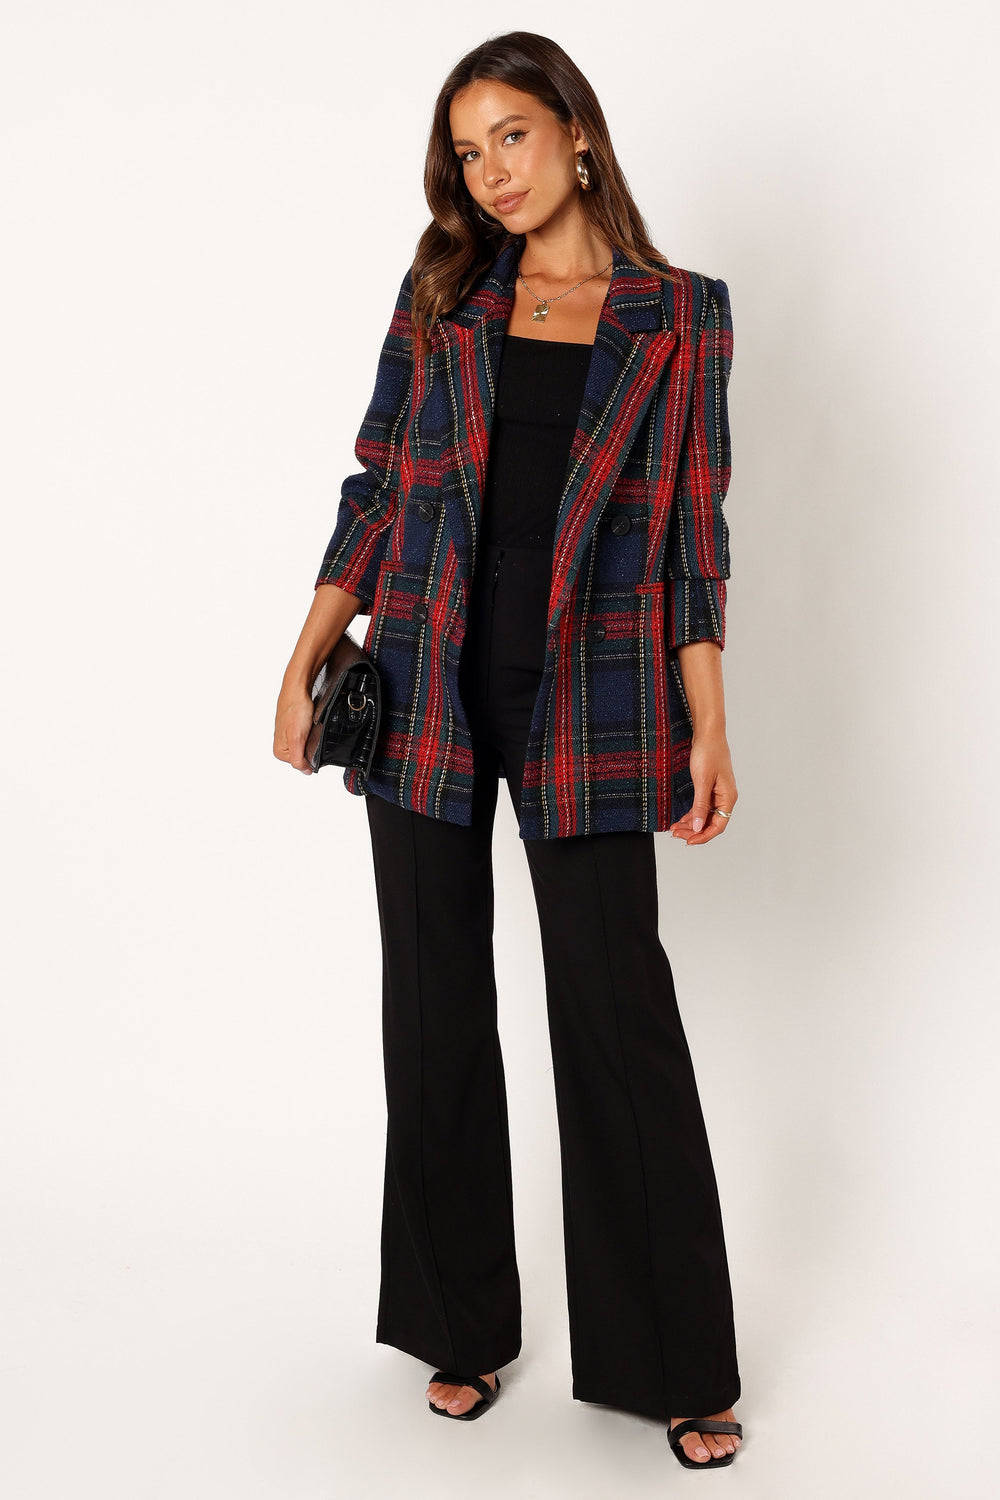 Petal and Pup USA OUTERWEAR Vivienne Plaid Blazer - Red/Navy Multi